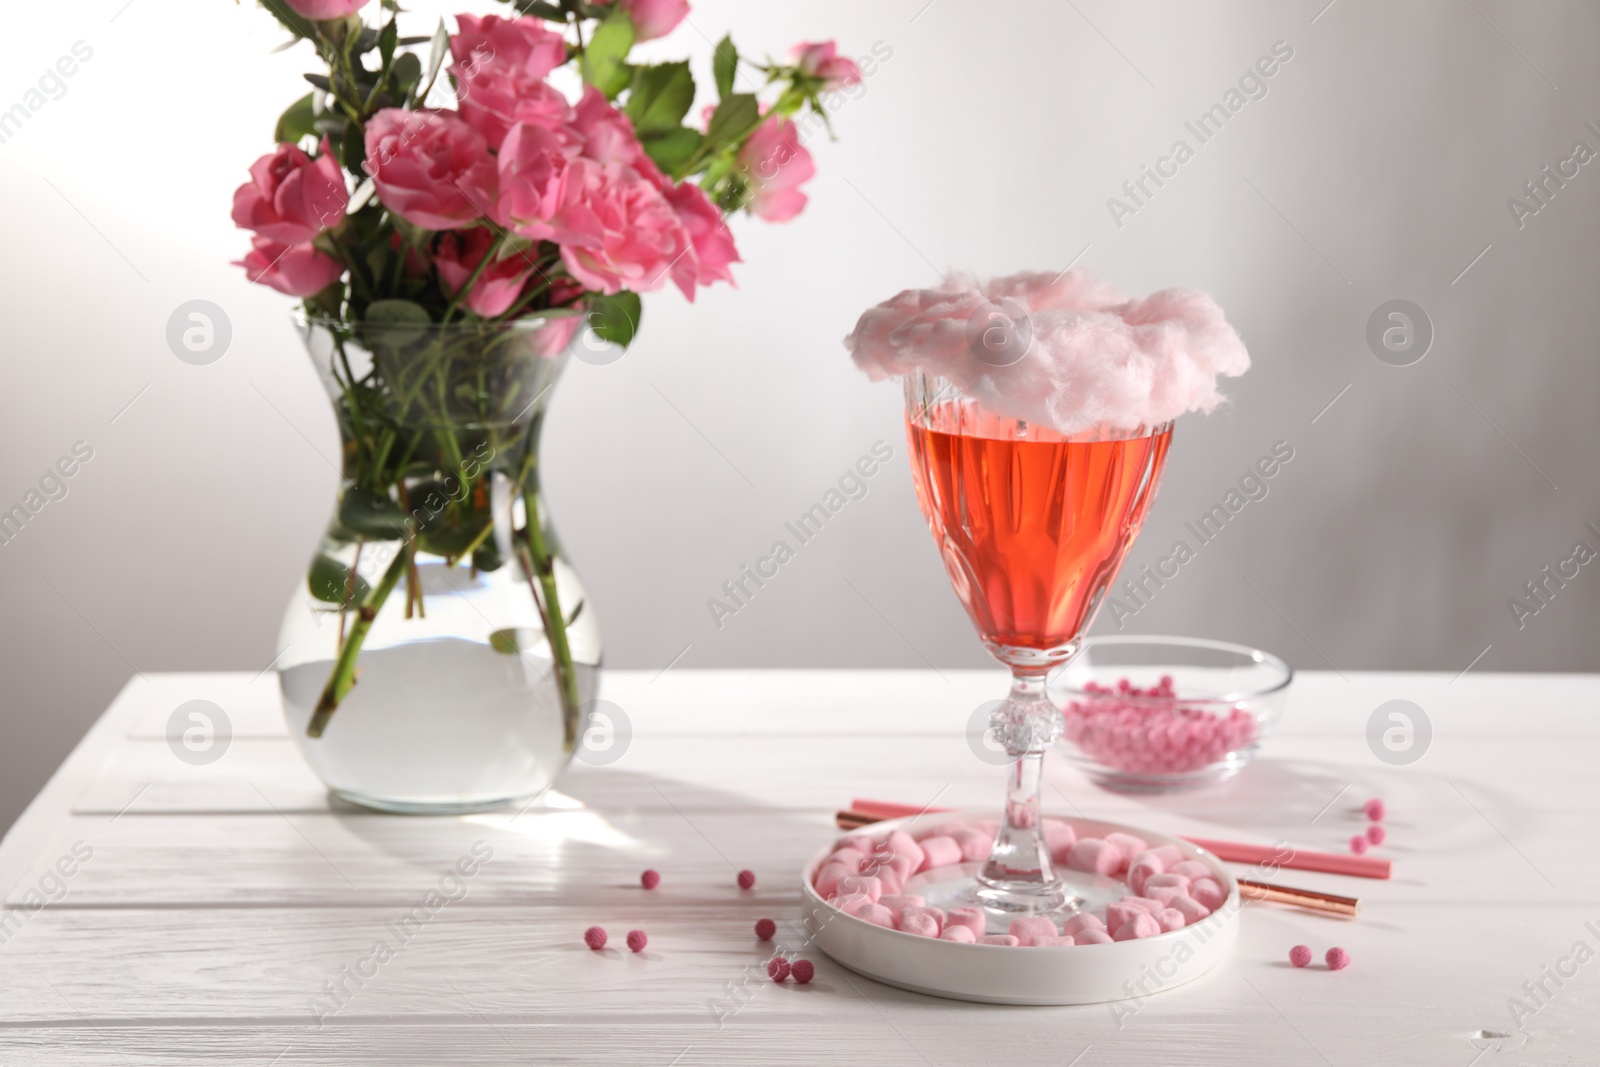 Photo of Cotton candy cocktail in glass, marshmallows, vase with pink roses and straws on white wooden table against gray background